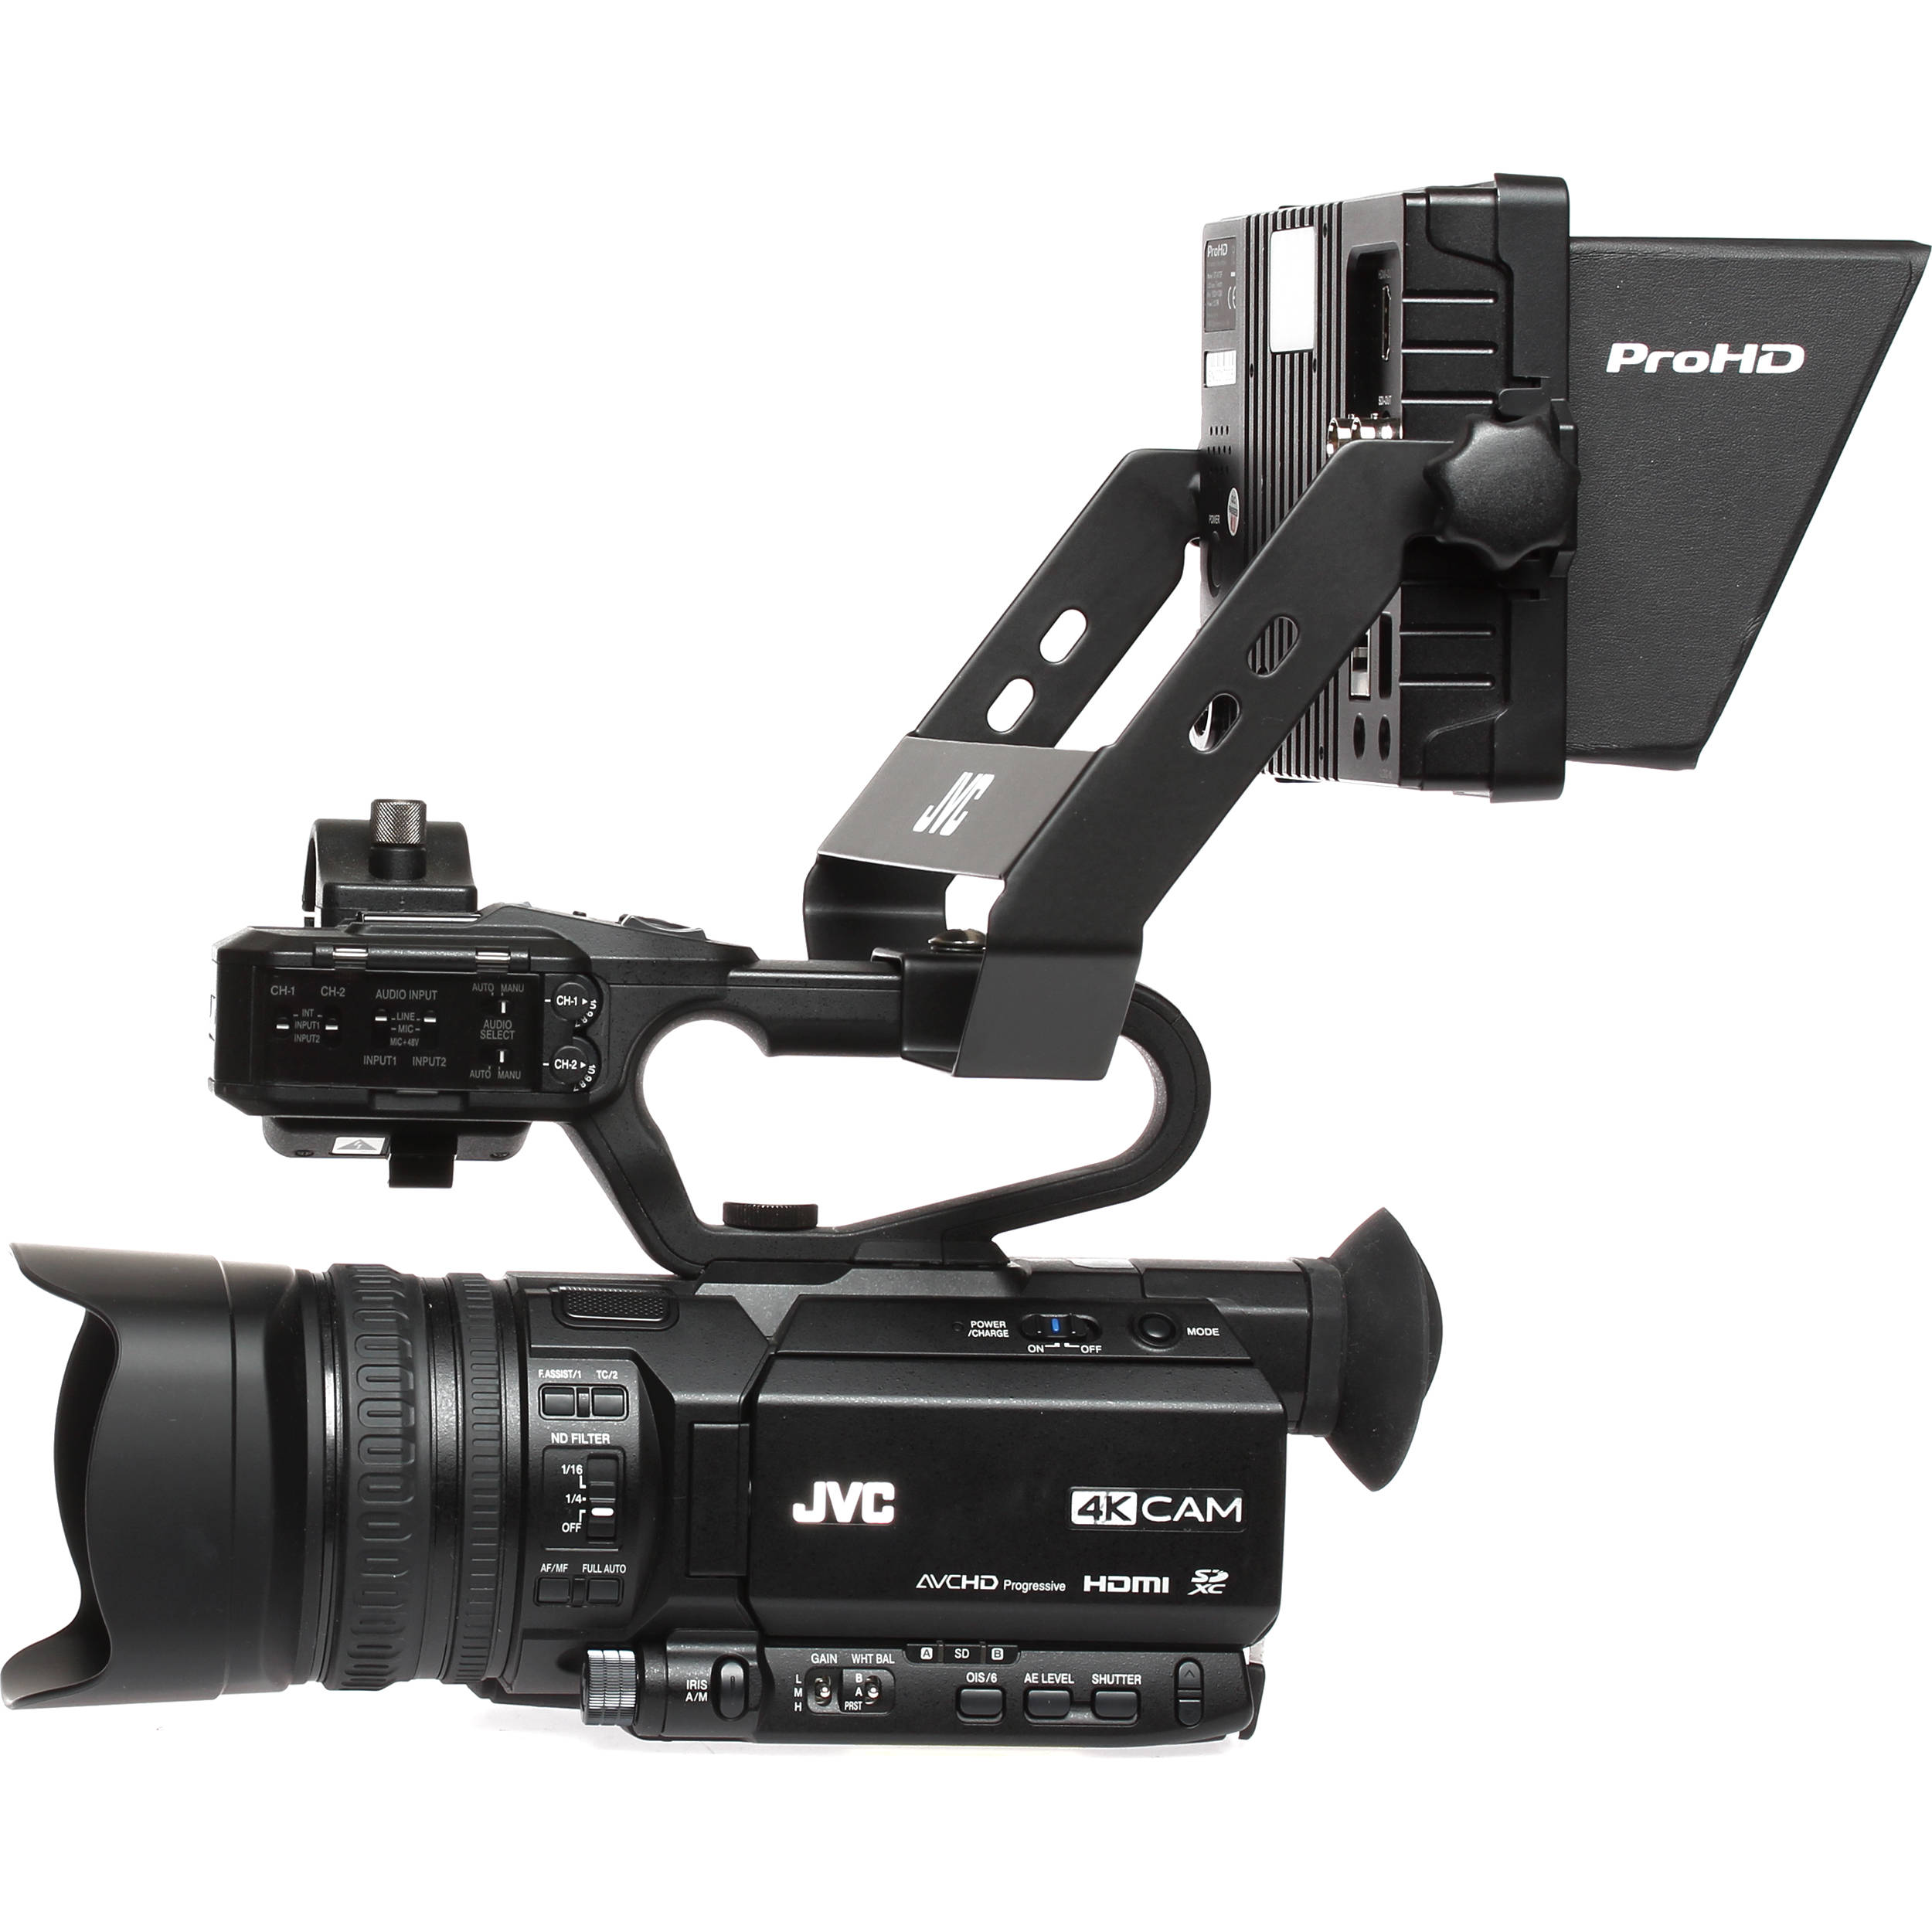 VIEWFINDER BRACKET FOR THE DT-X73F MONITOR